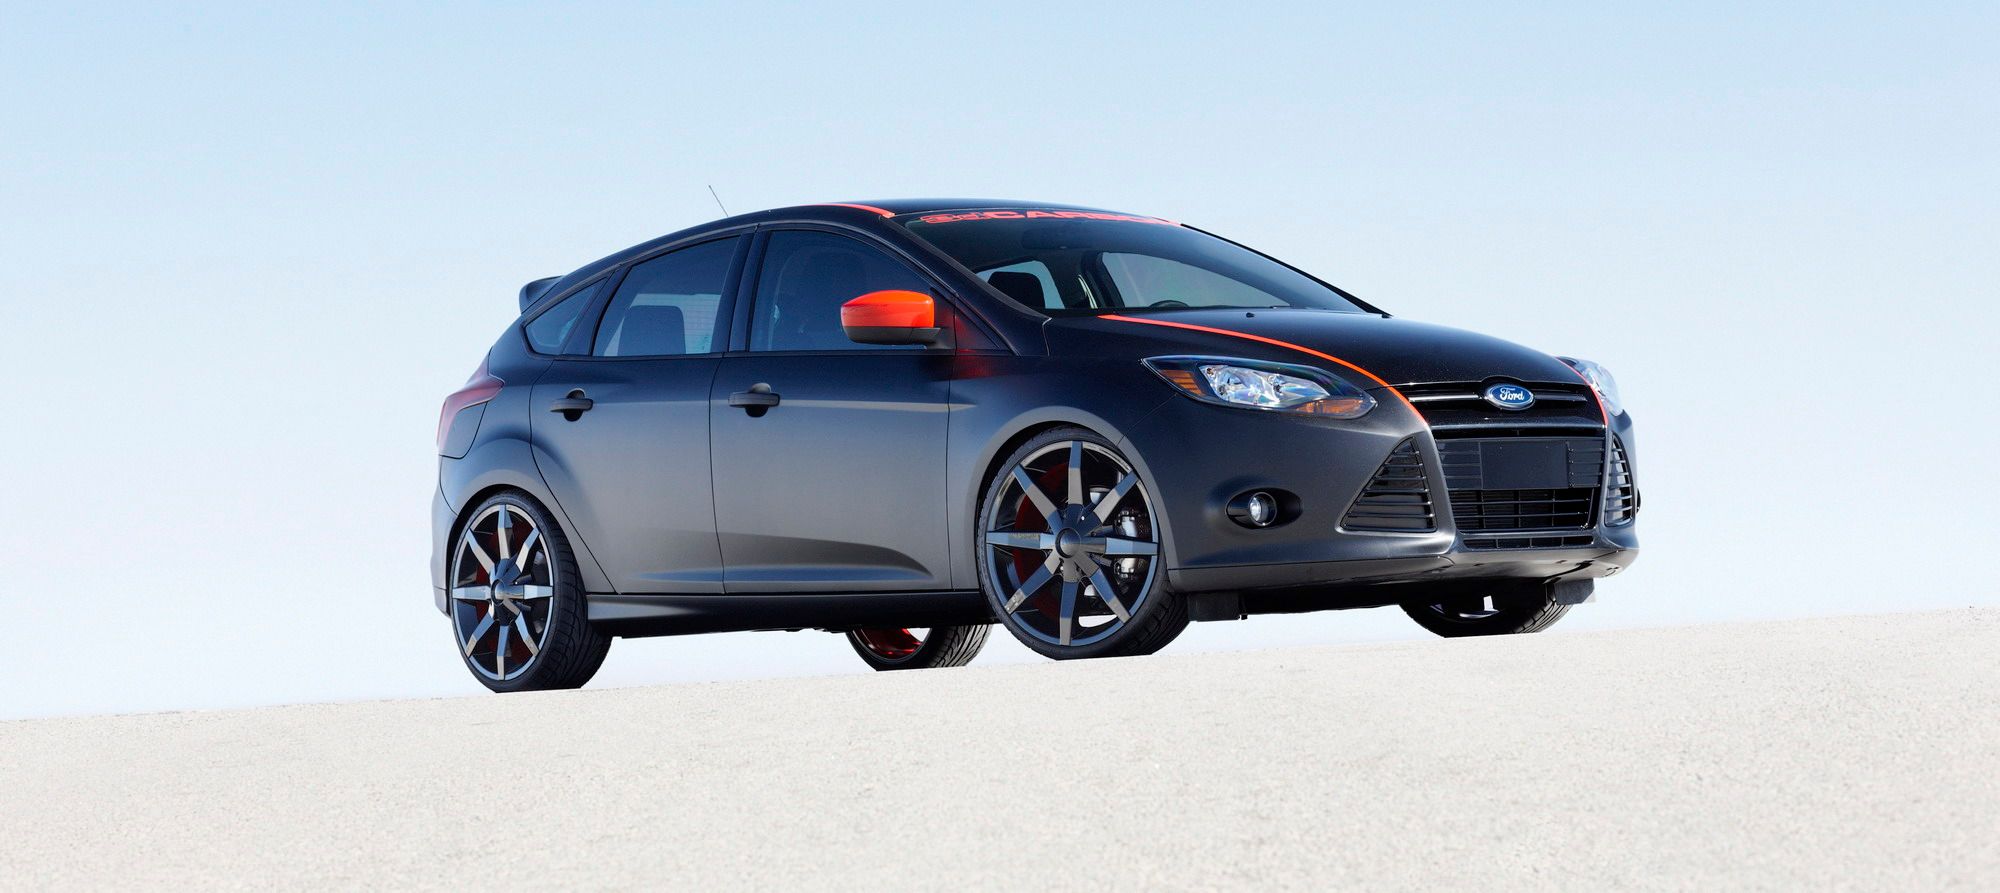 2012 Ford Focus by 3dCarbon